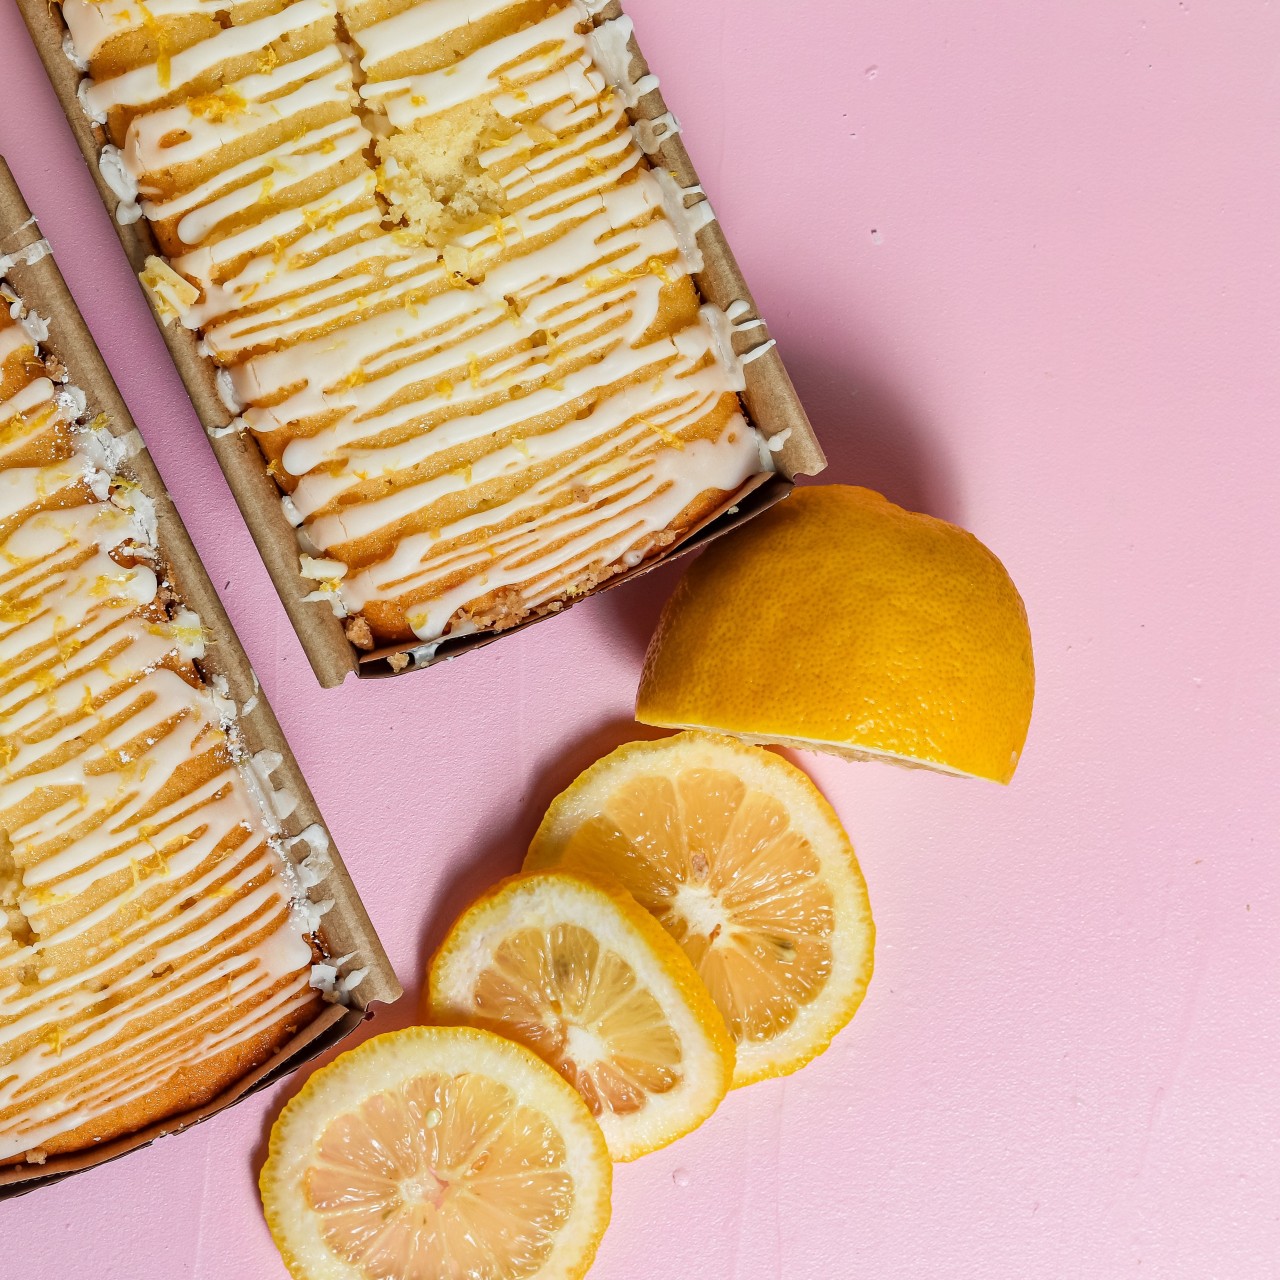 Lemon Drizzle Cake Gluten-Free
Even people who are on a gluten free diet can enjoy this delicious Lemon Drizzle Cake.
The recipe by Tastes of Health